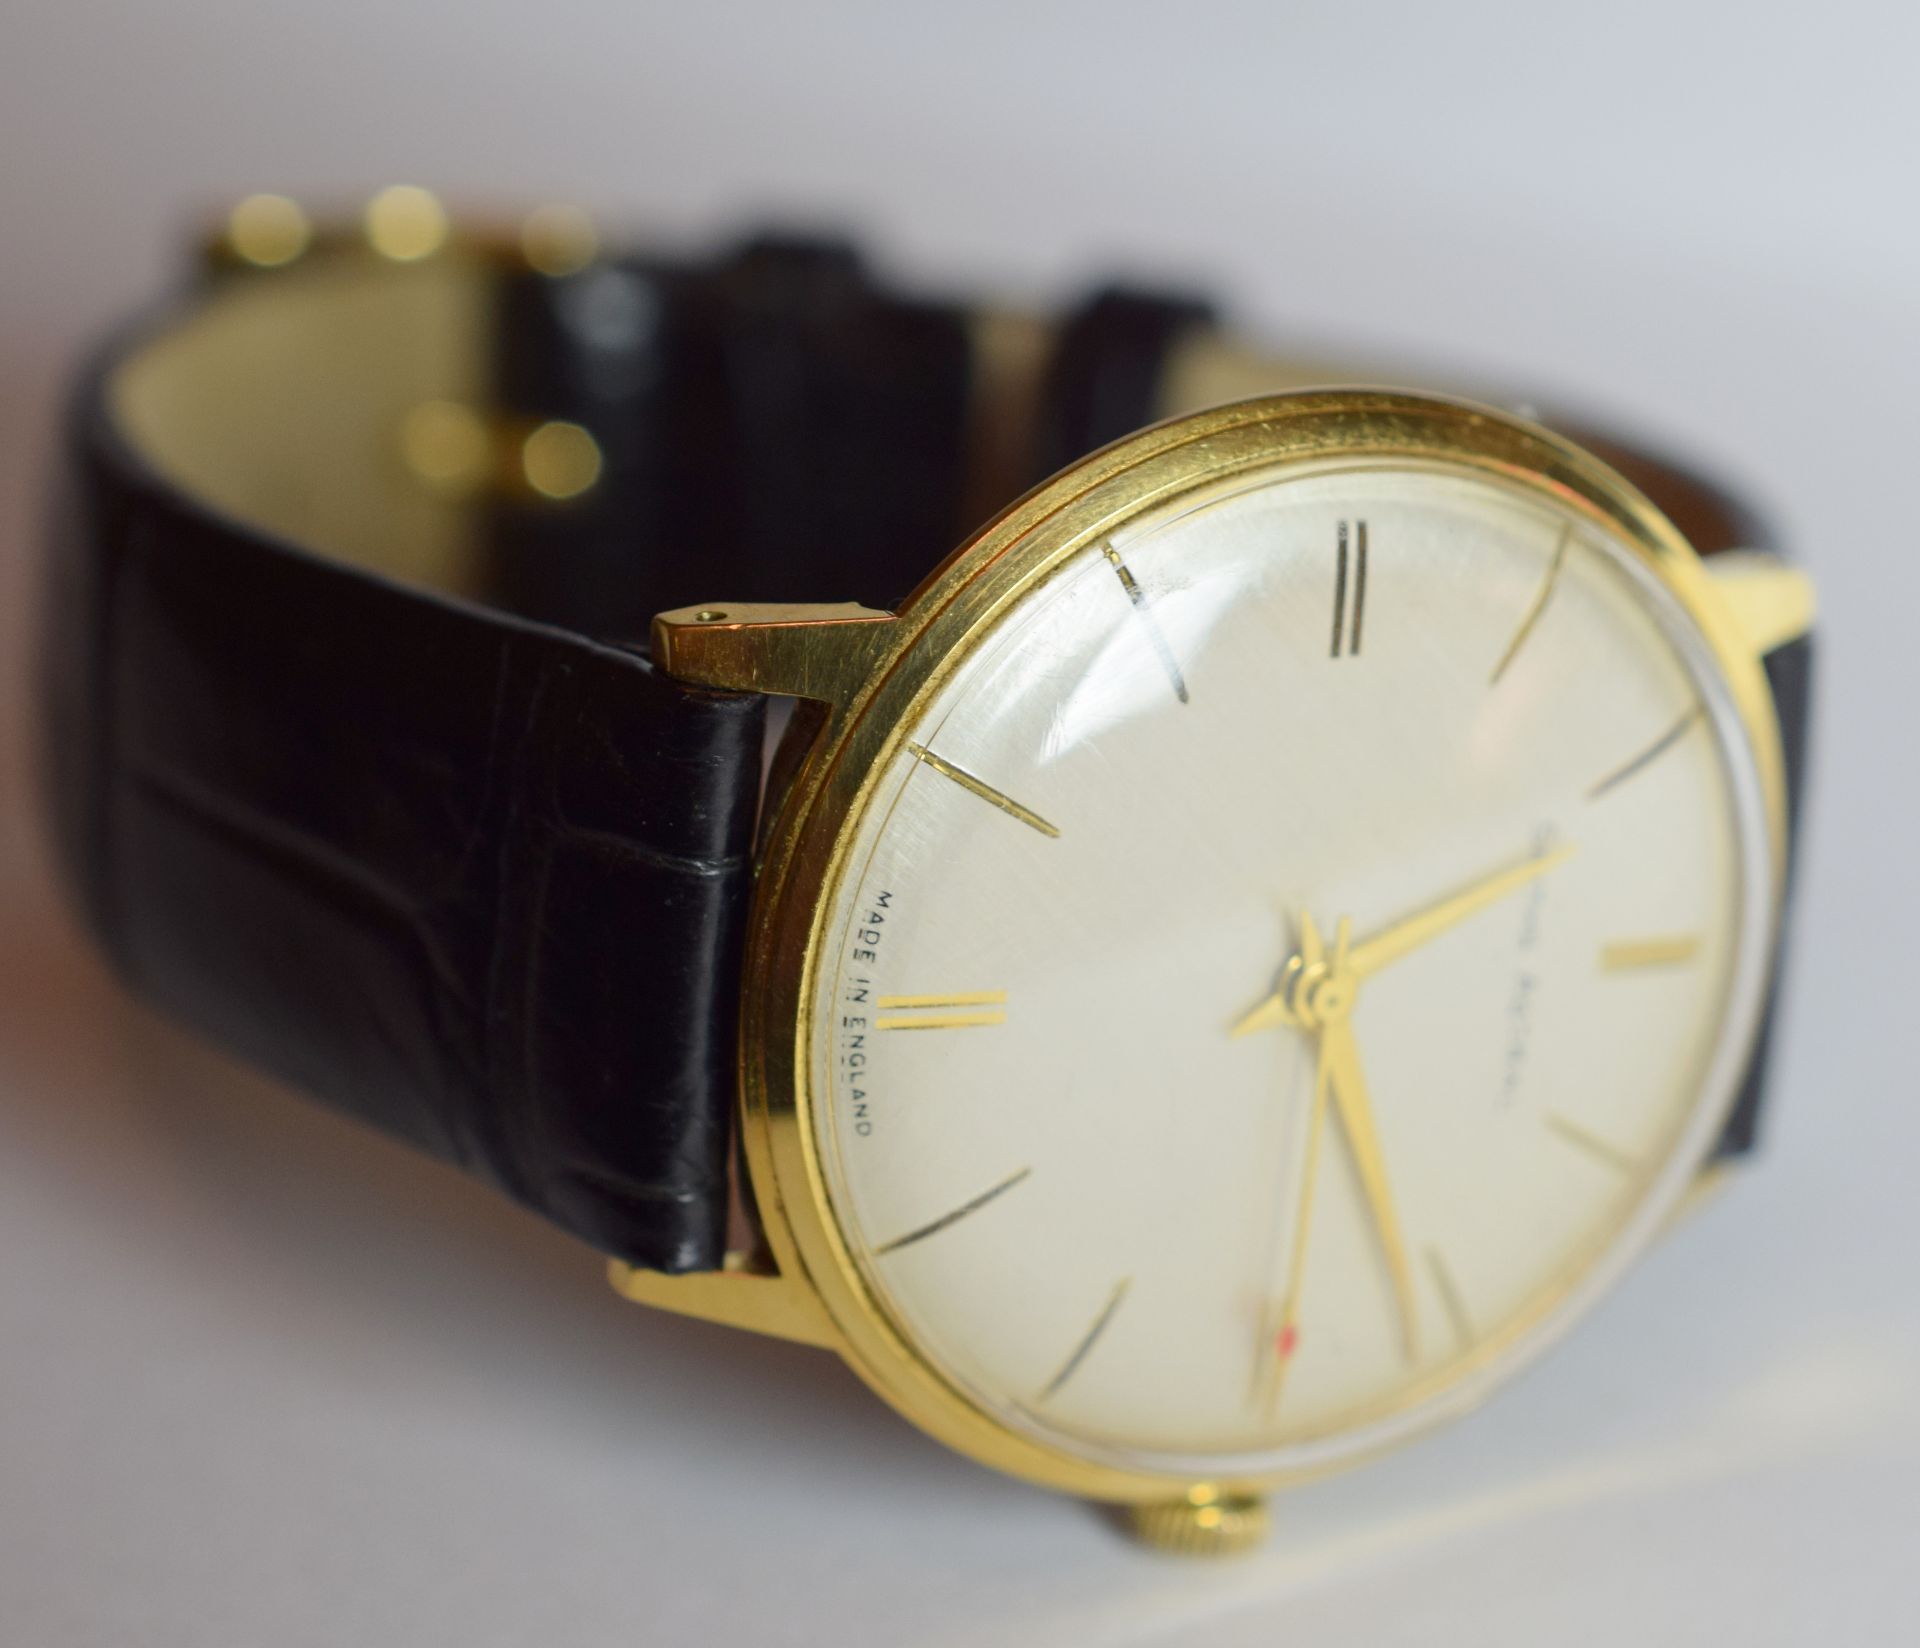 Smiths Astral Gentleman's Wristwatch - Image 3 of 5